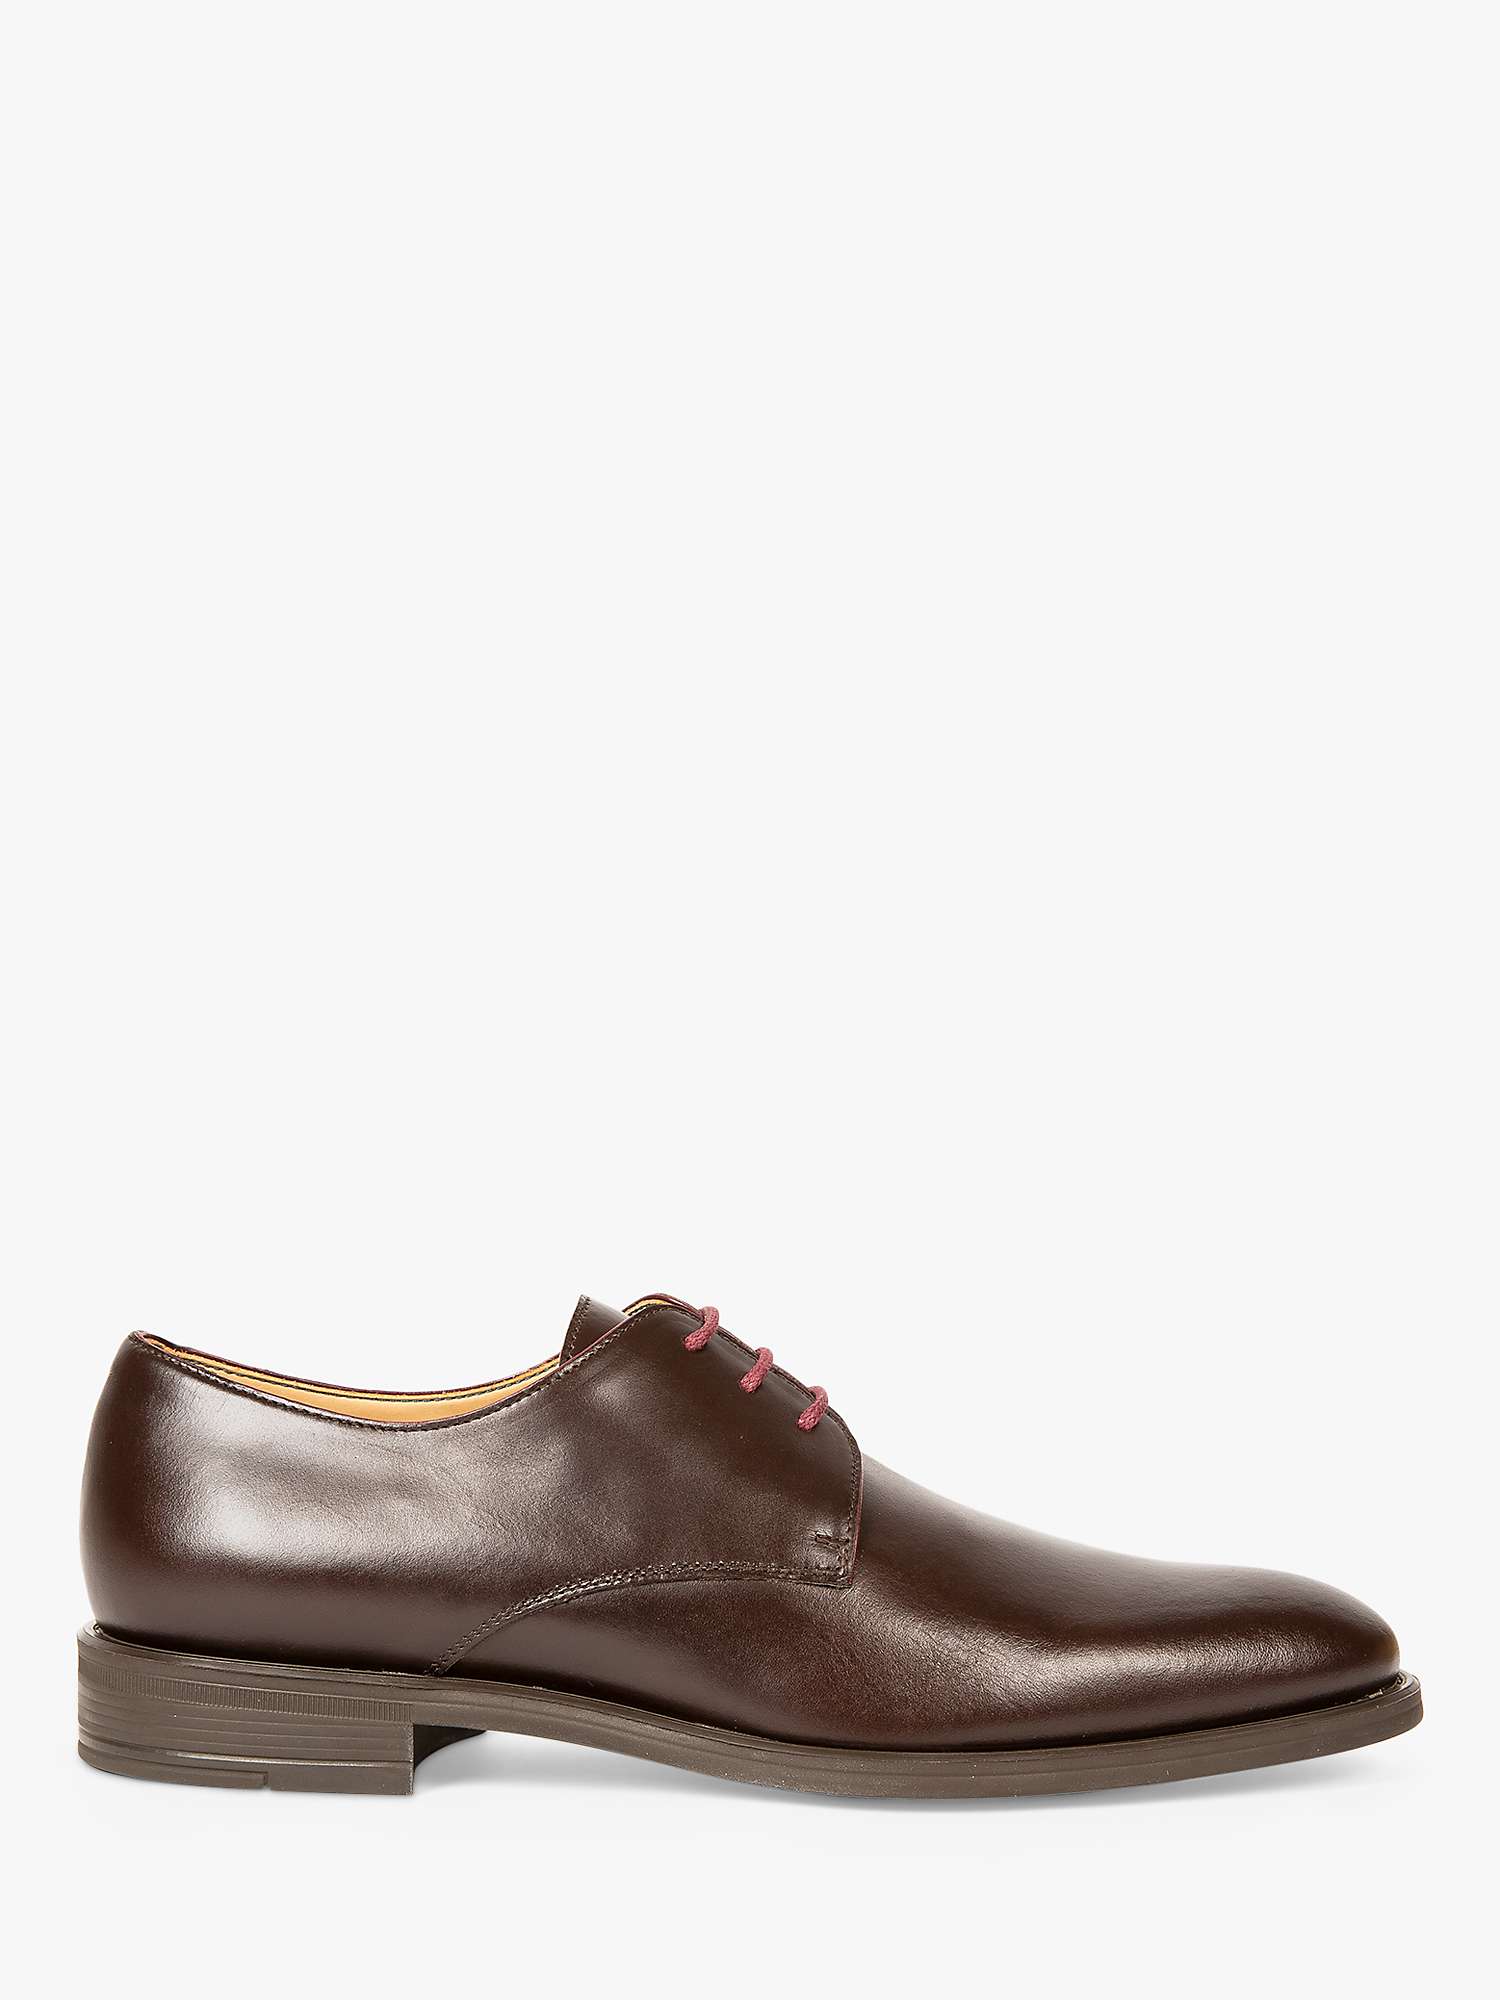 Paul Smith Bayard Leather Formal Shoes, Brown at John Lewis & Partners